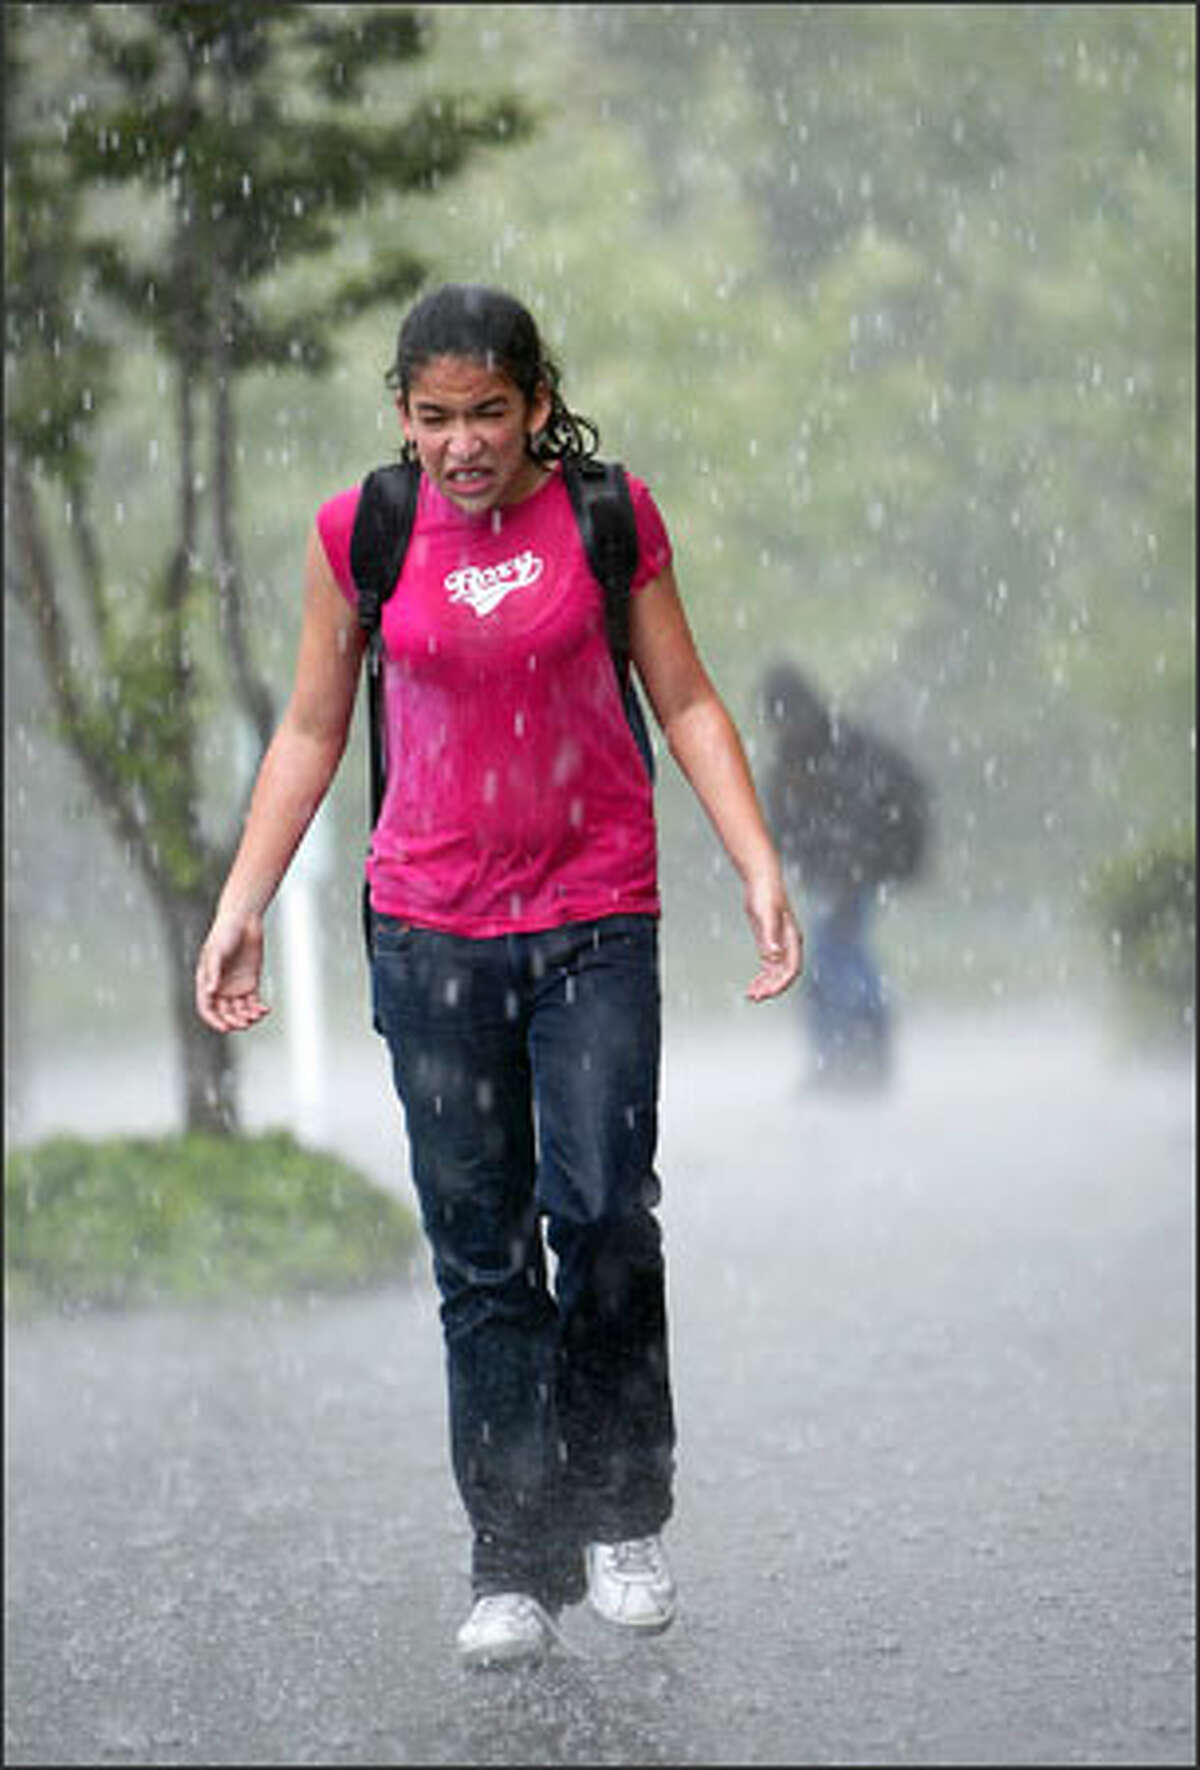 Sarah Taylor, 13, was caught off guard by a storm as she walked home from school in Federal Way.